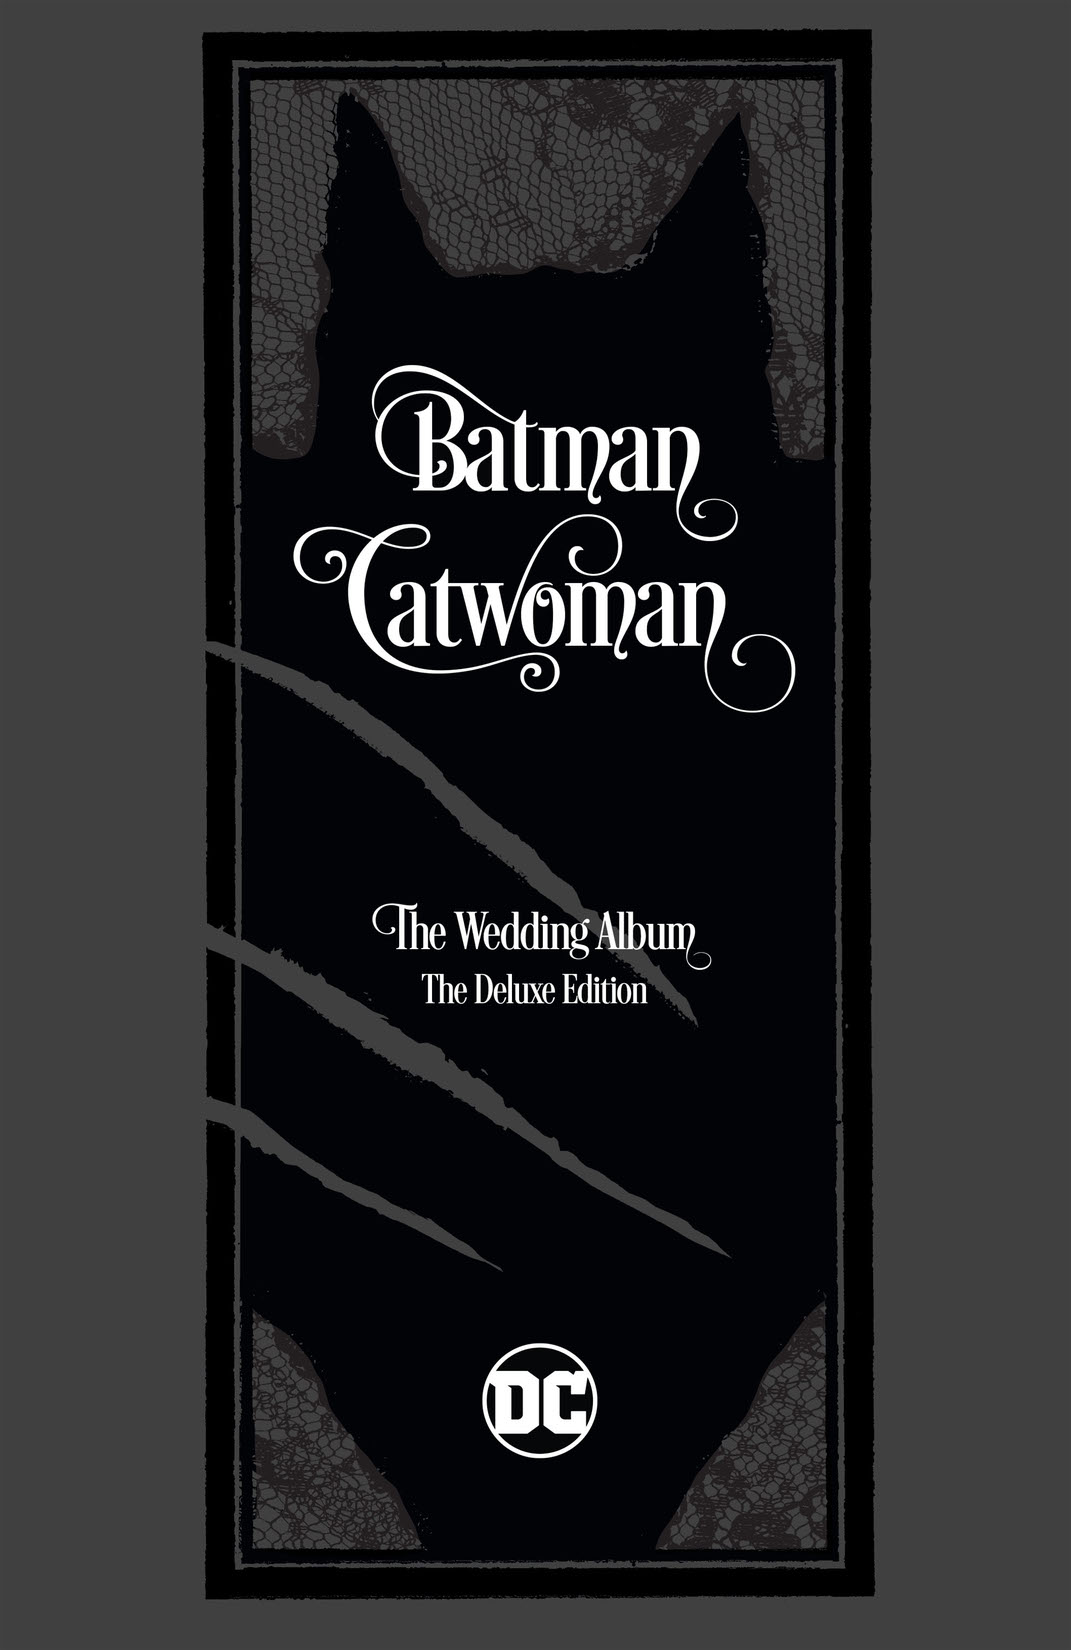 Batman/Catwoman: The Wedding Album - The Deluxe Edition preview images